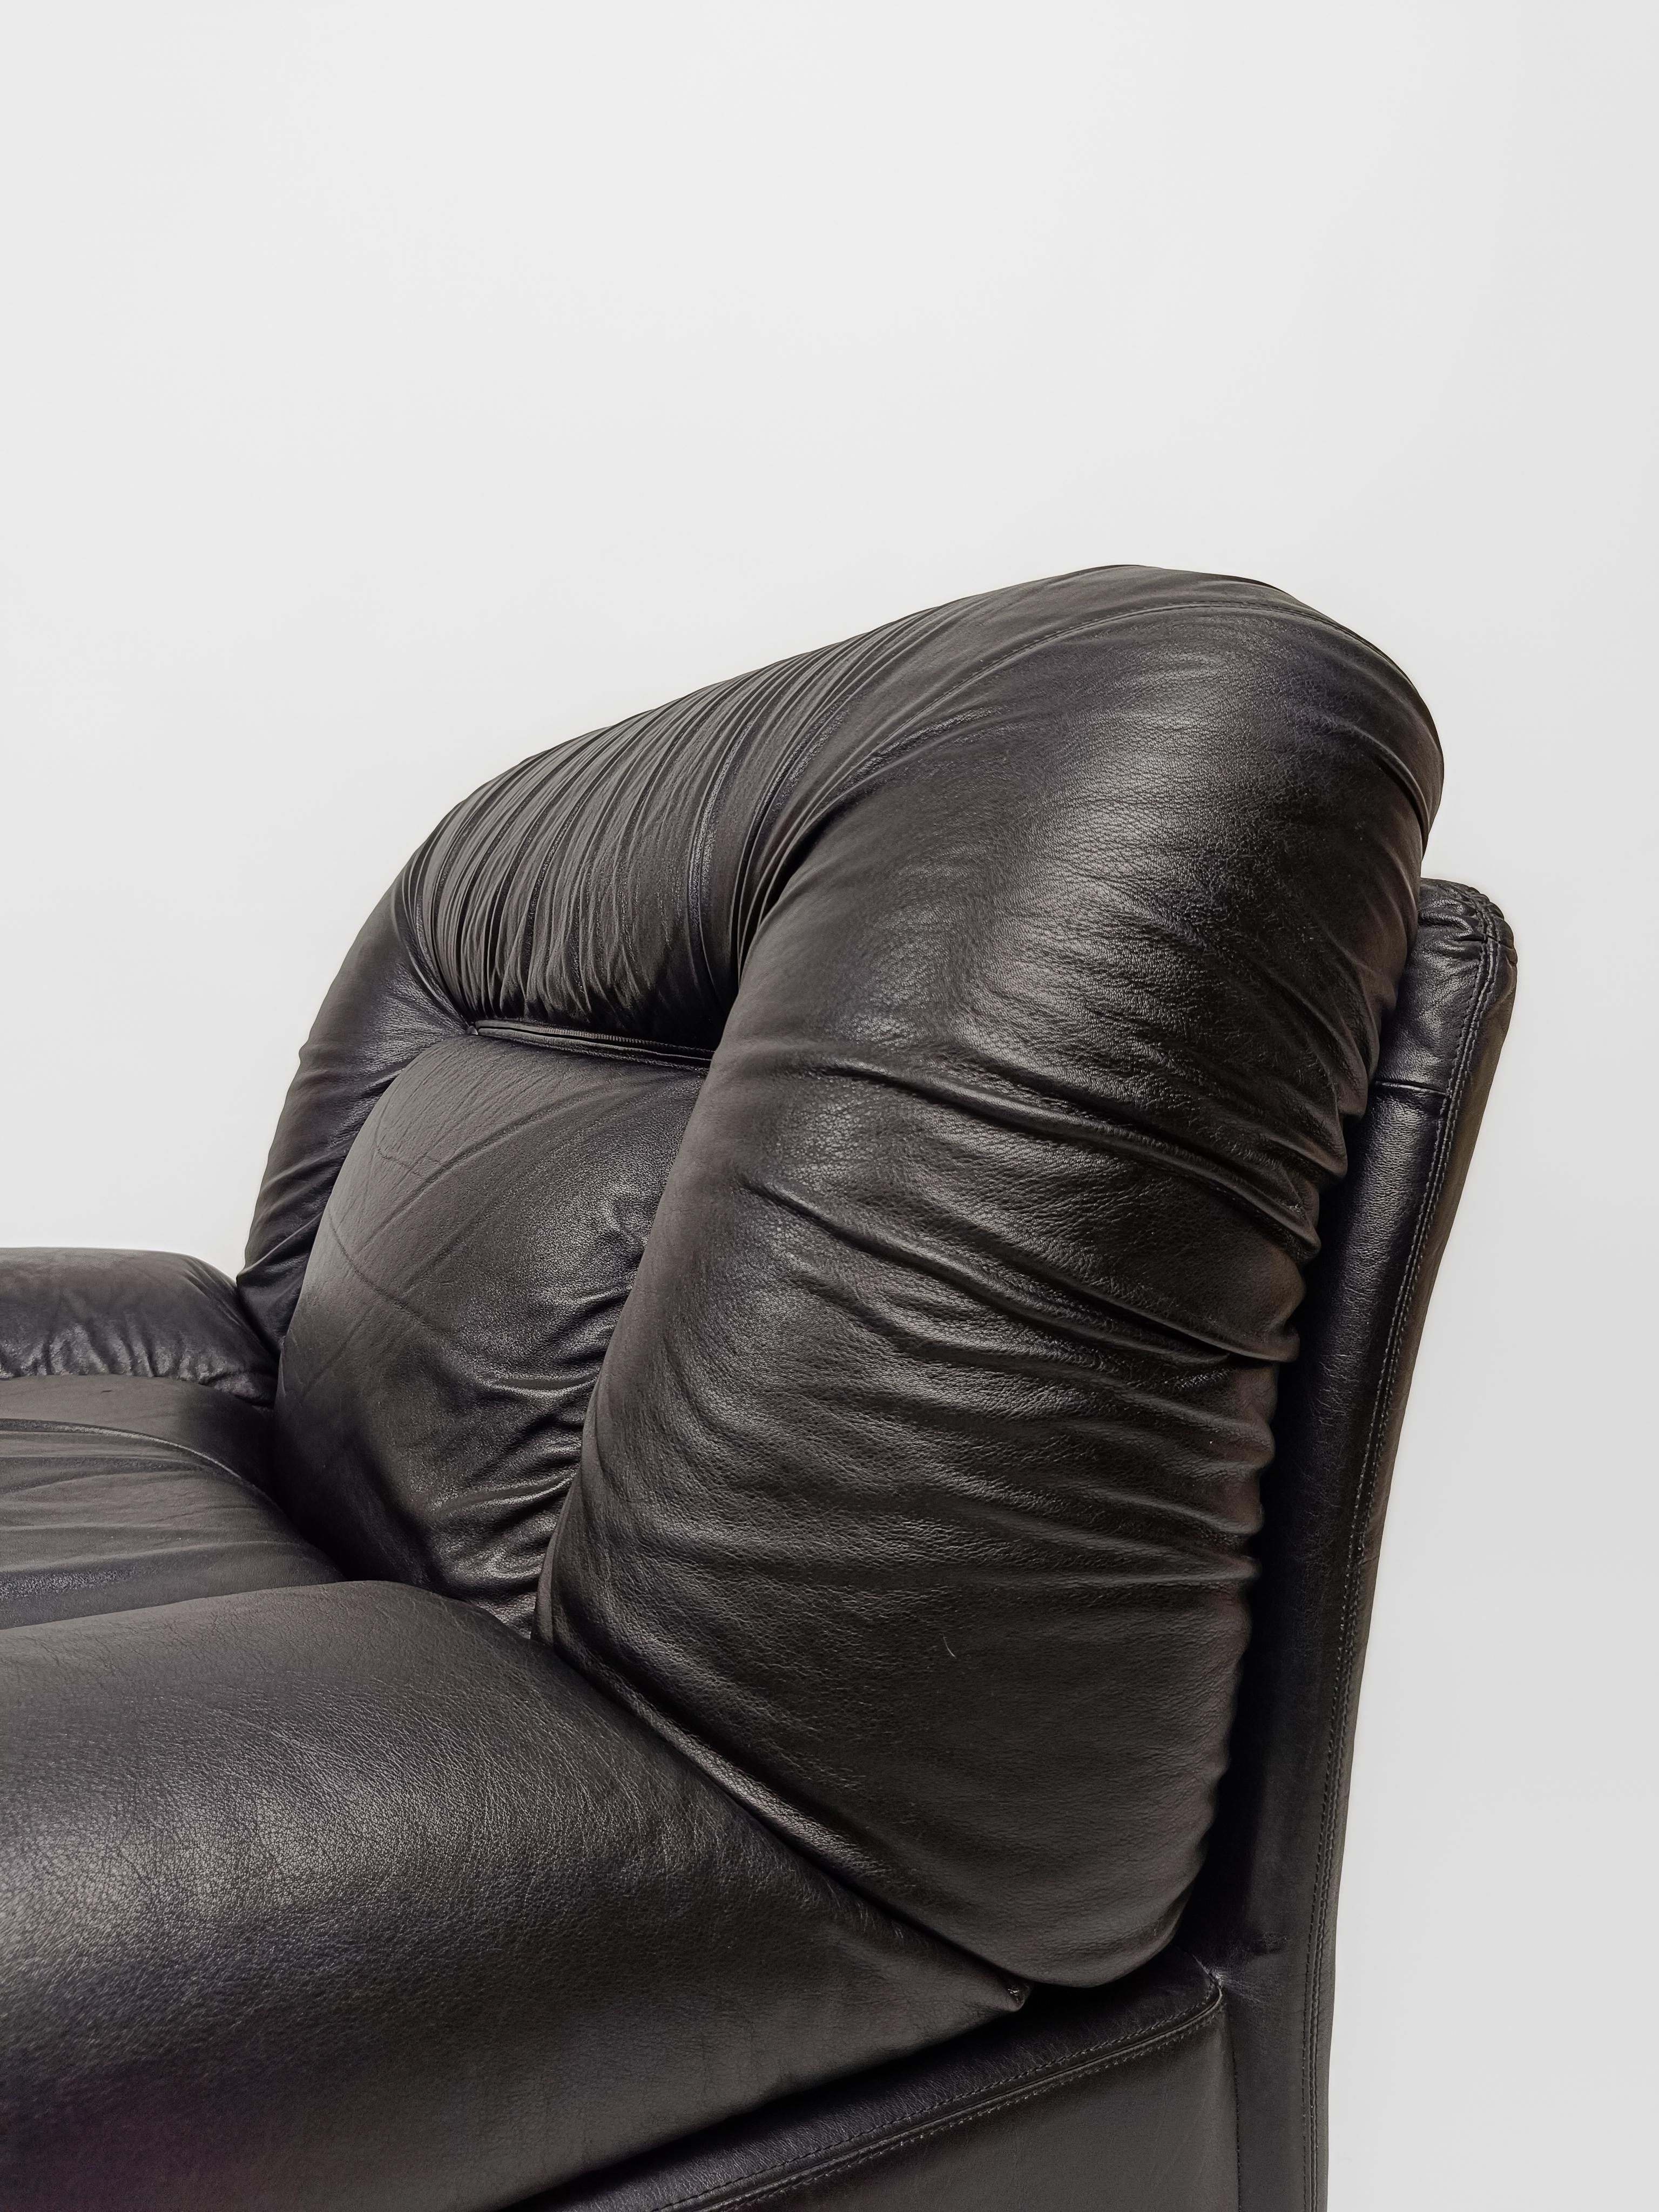 Space Age Italian Modular Lounge Chair in Black Leather model PANAREA by Lev & Lev, 1970s  For Sale